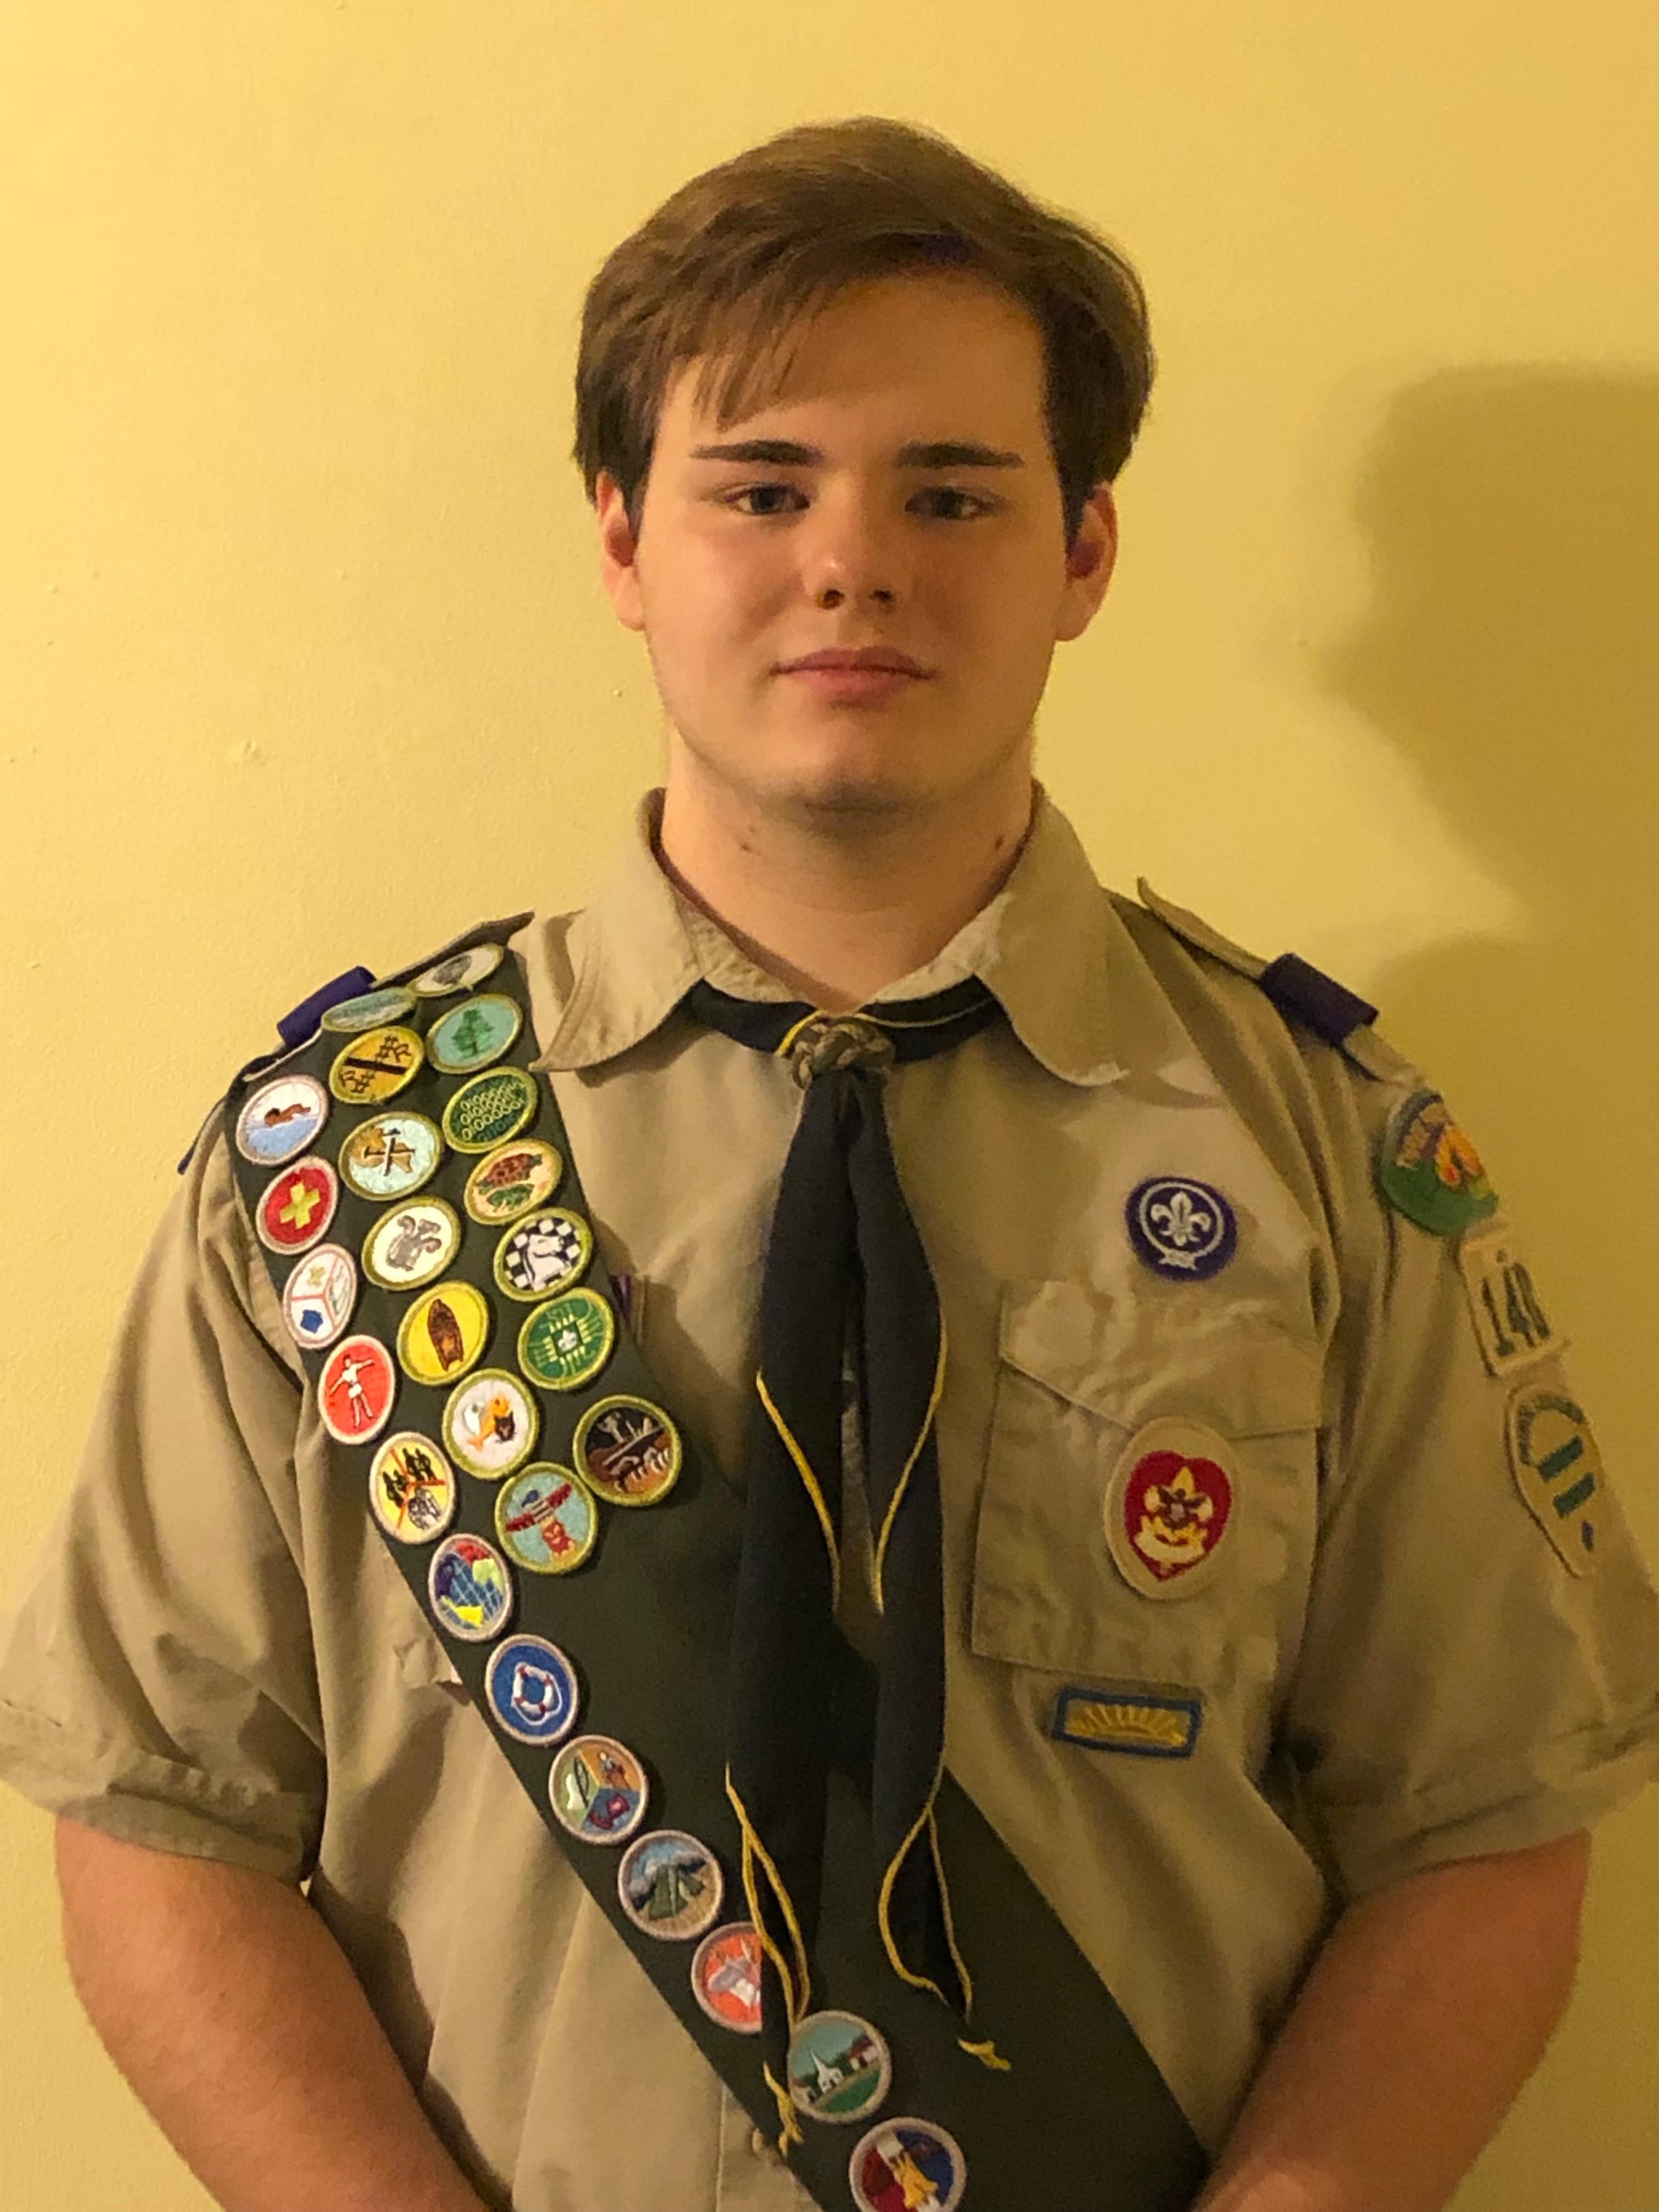 Willowbrook alumnus earns Eagle Scout status